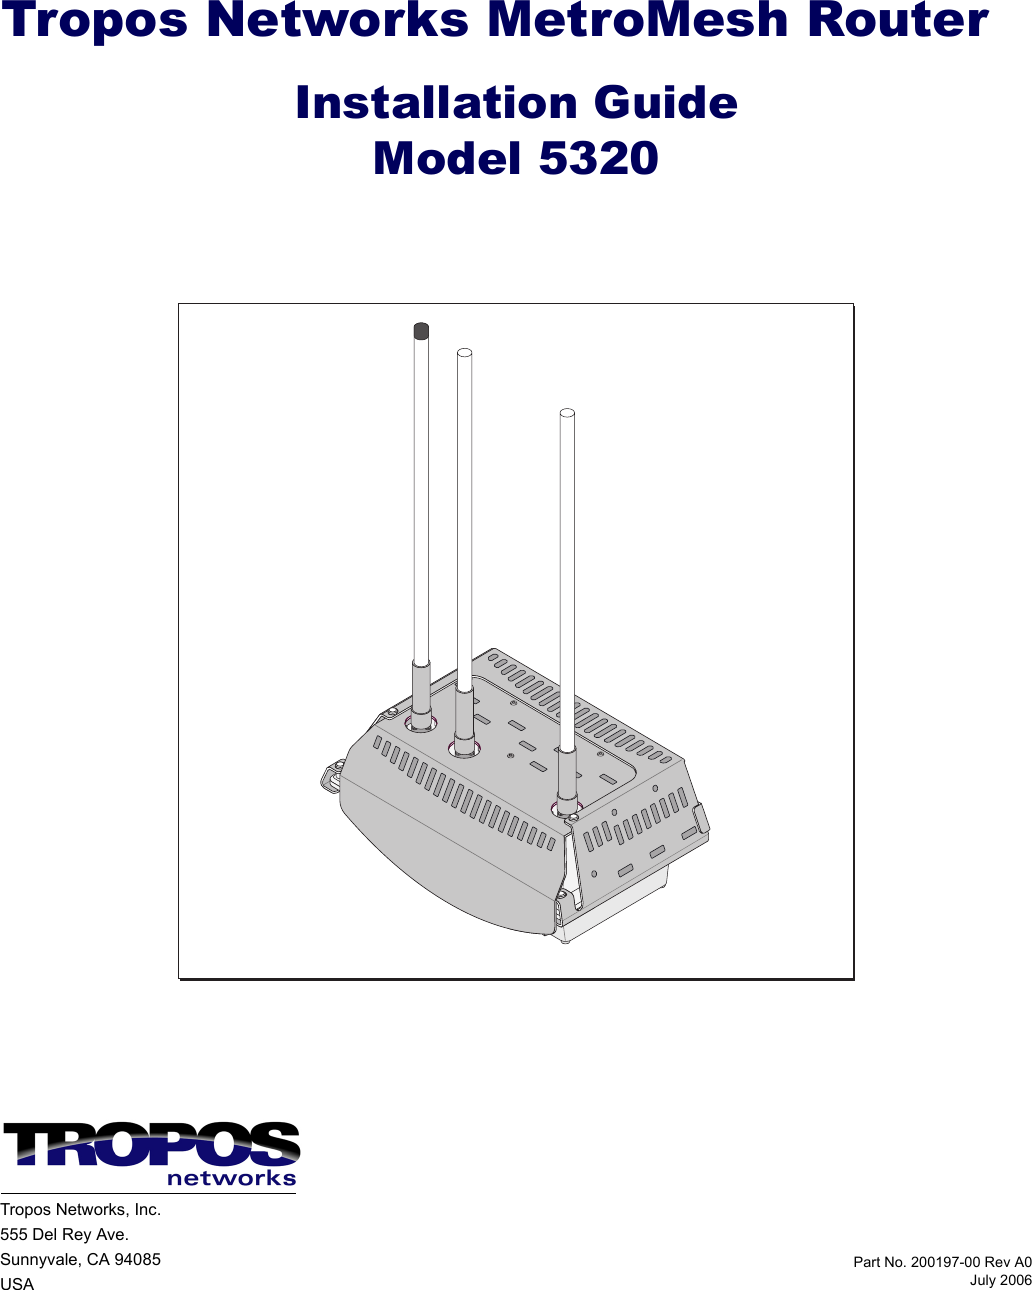 Part No. 200197-00 Rev A0July 2006Tropos Networks MetroMesh RouterInstallation GuideModel 5320Tropos Networks, Inc.555 Del Rey Ave.Sunnyvale, CA 94085USA